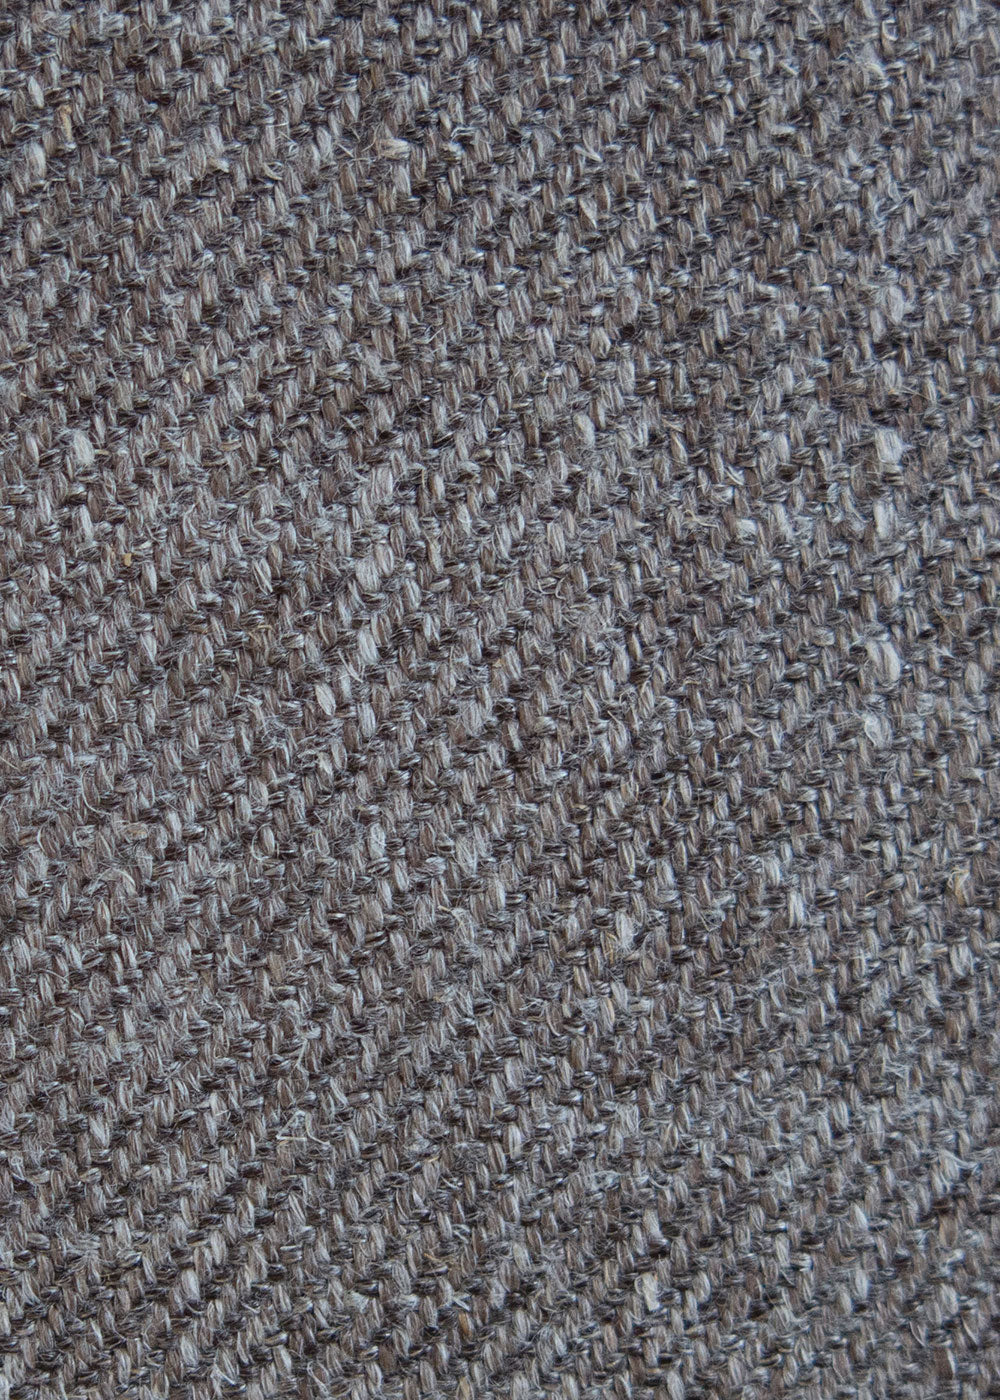 twill upholstery fabric in speckled charcoal